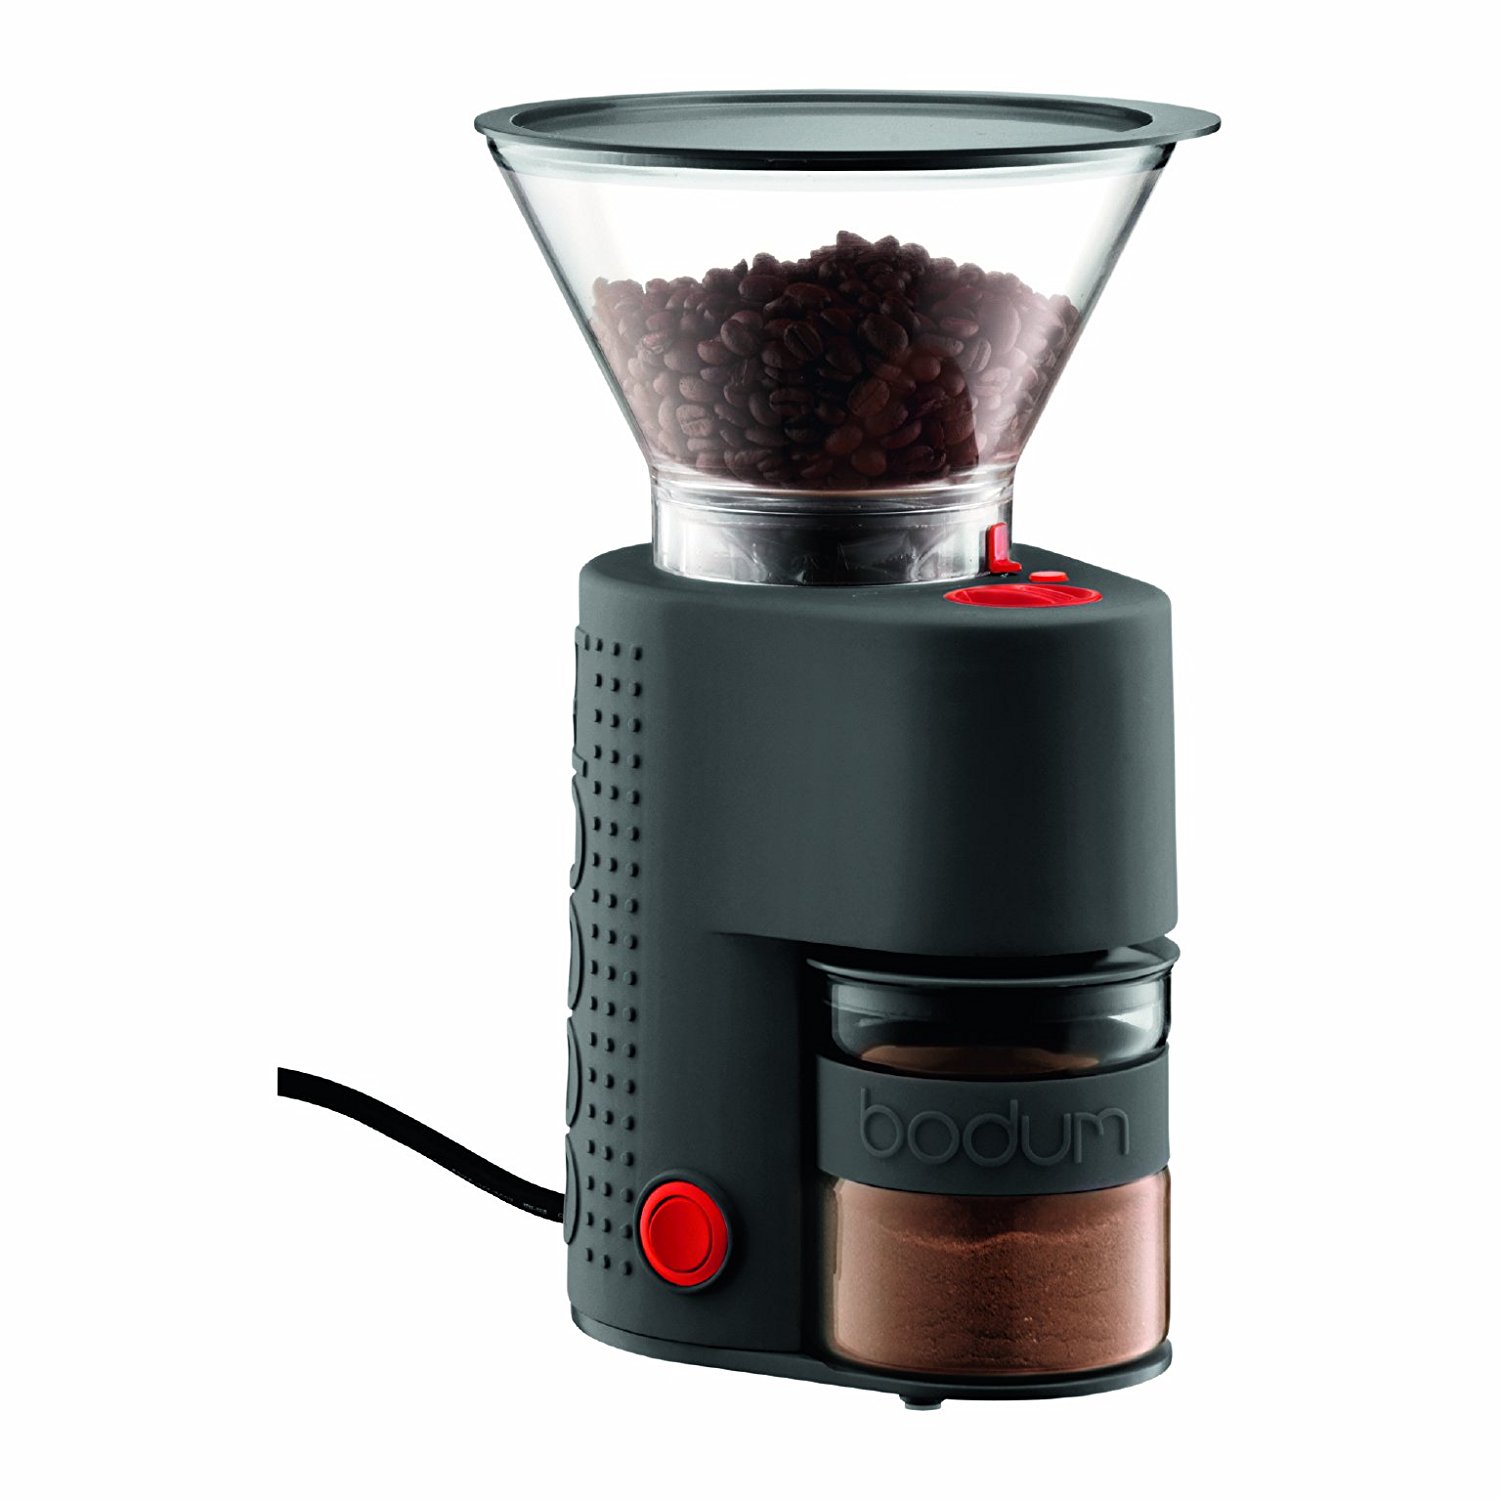 Amazon.com: Coffee Grinders: Home & Kitchen: Manual Grinders ...